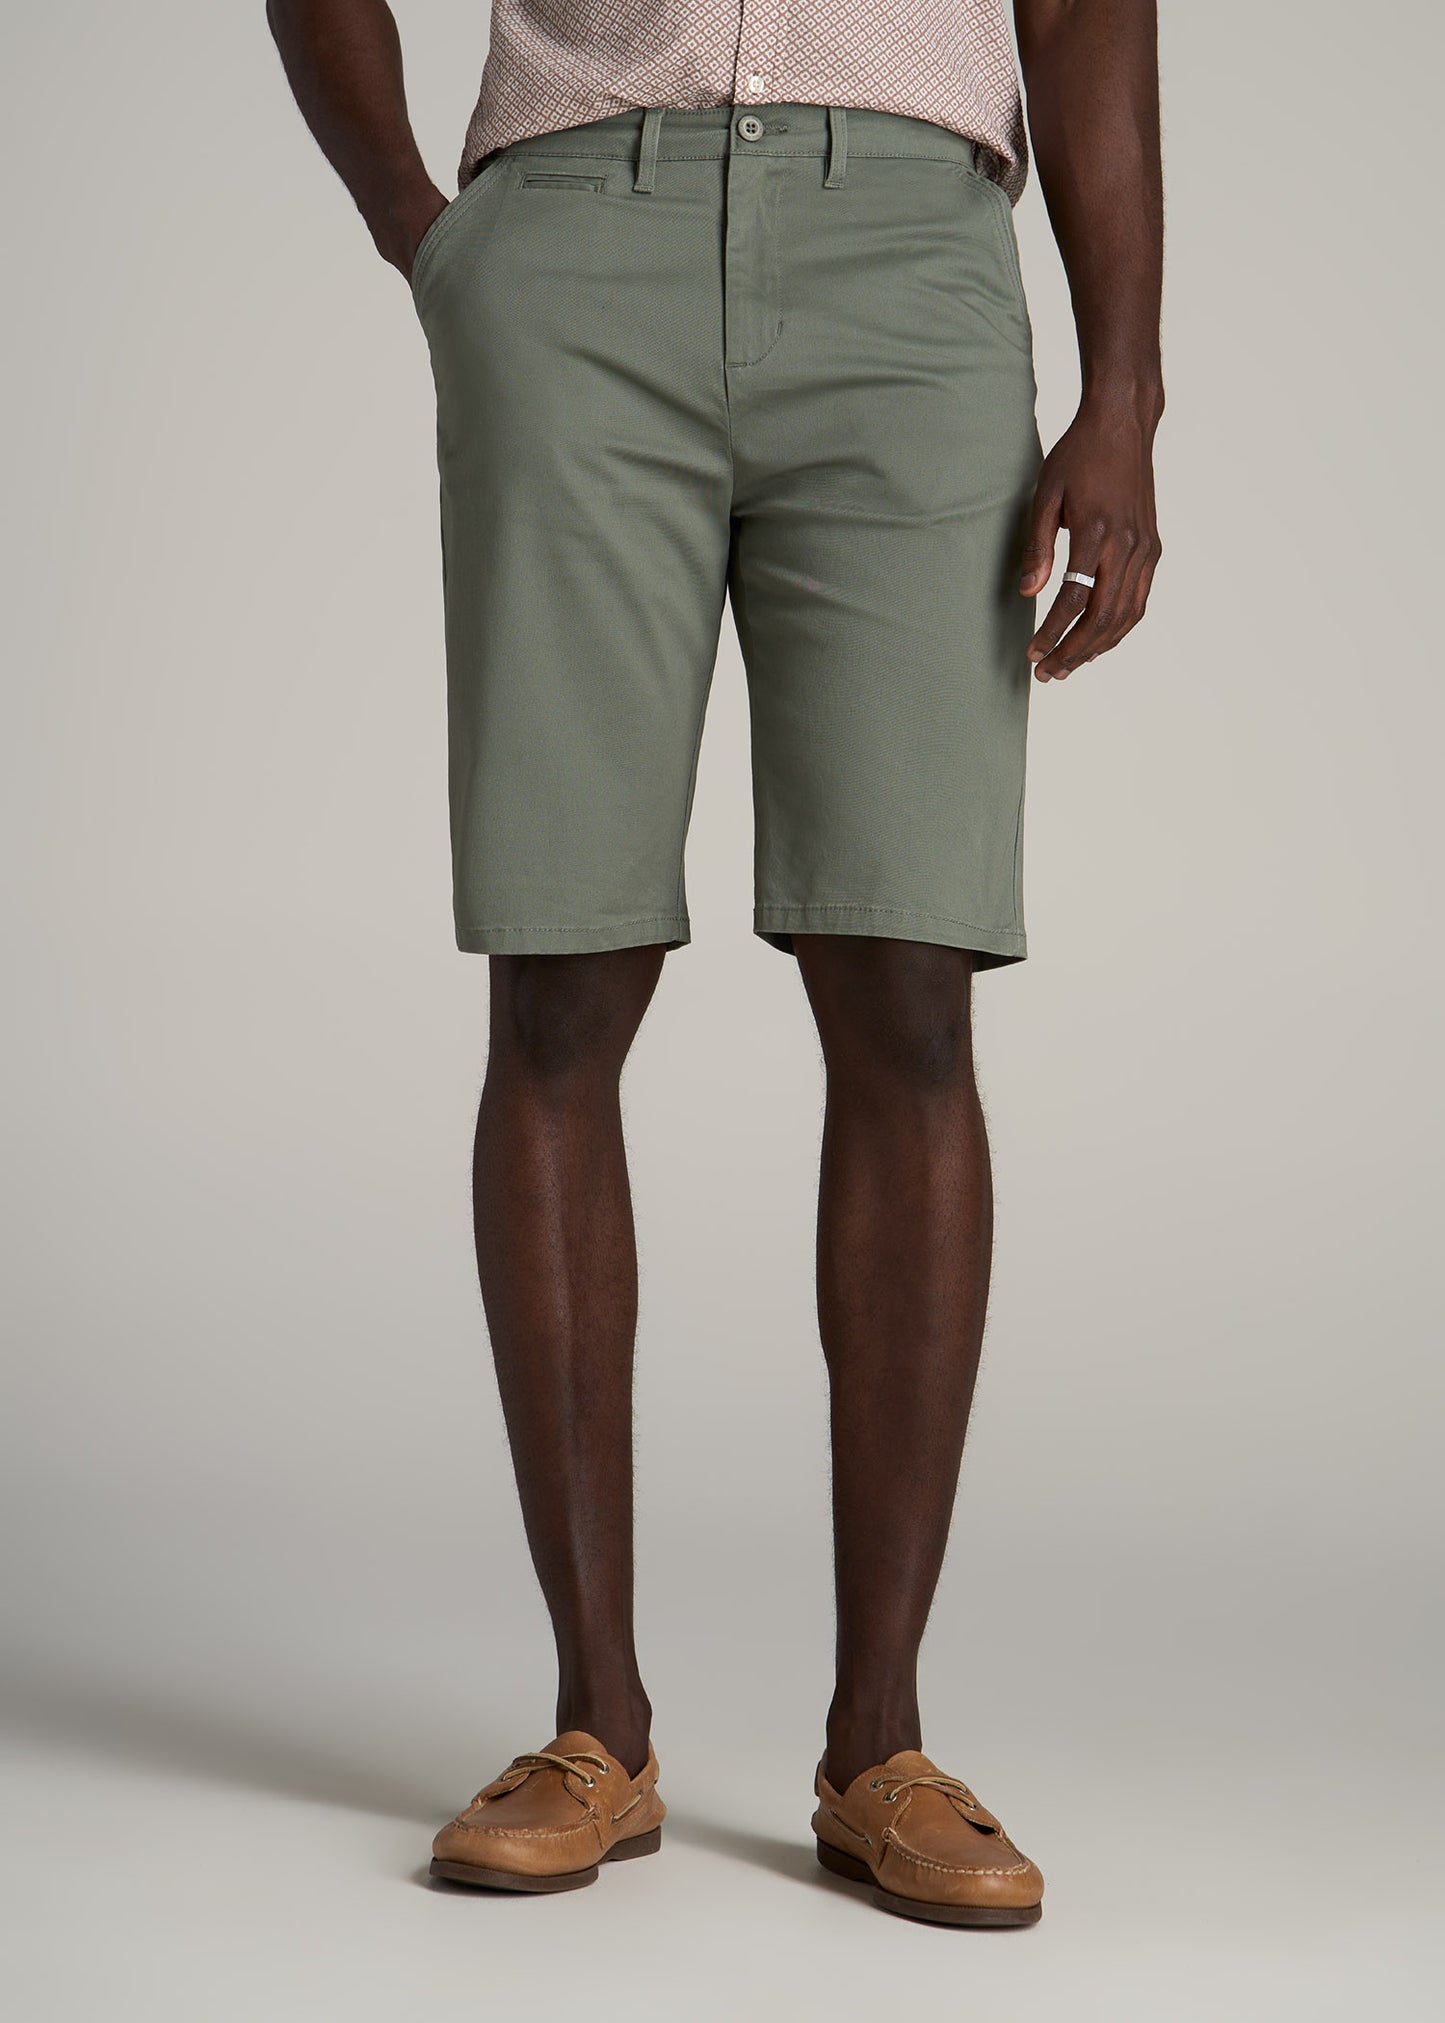 Chino Shorts for Tall Men in Wreath Green